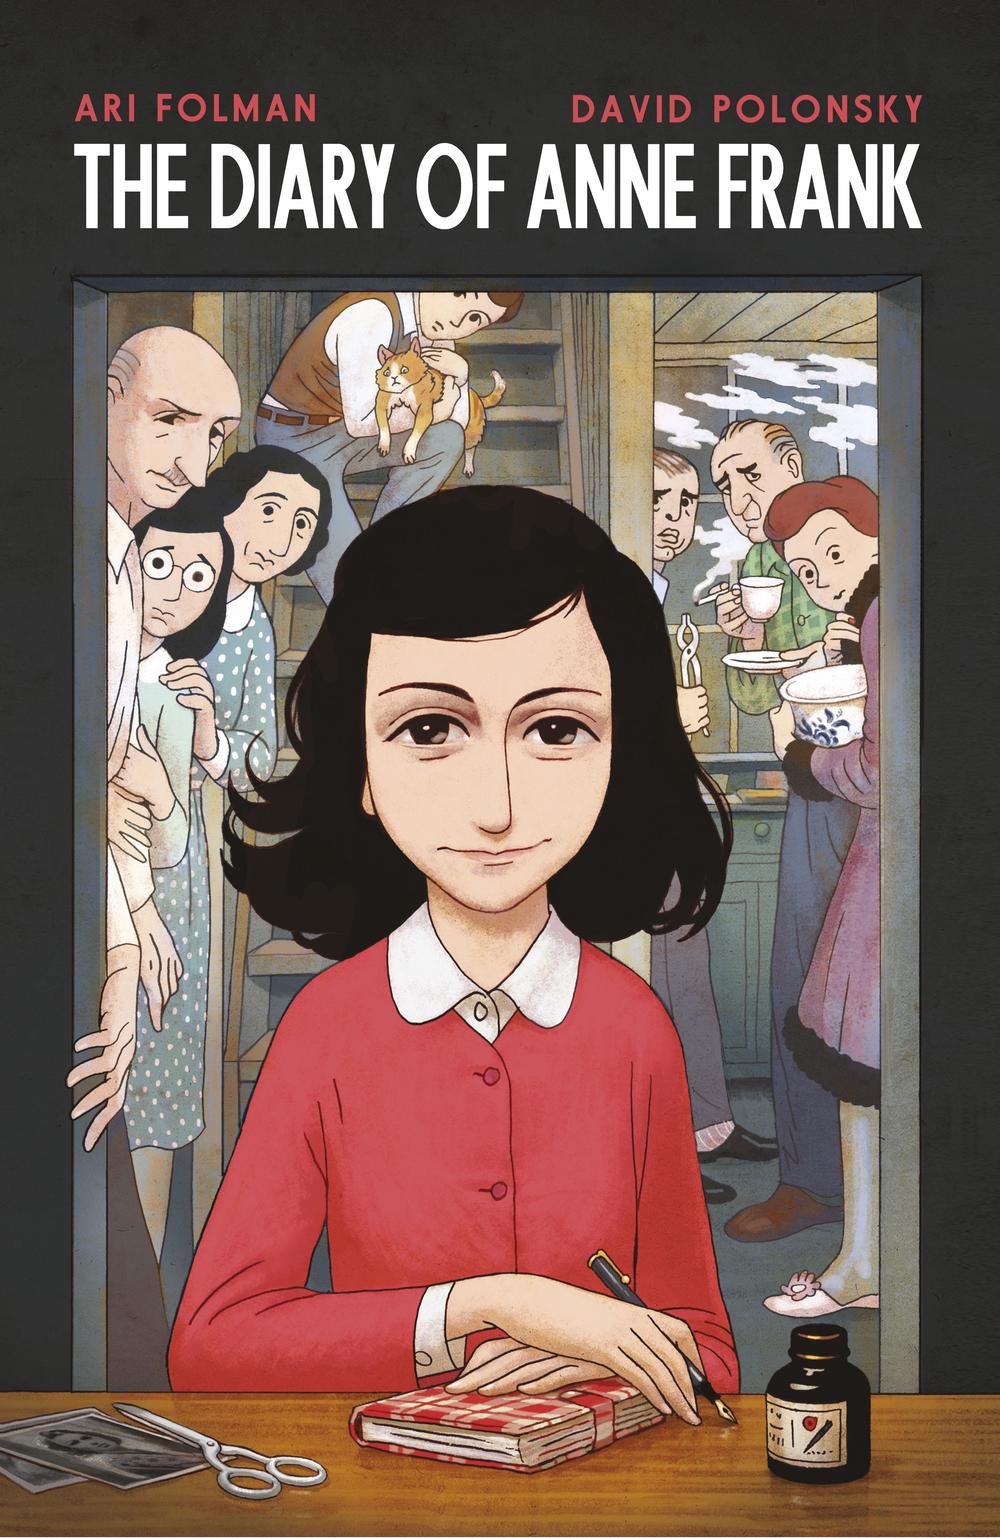 book review of anne frank diary